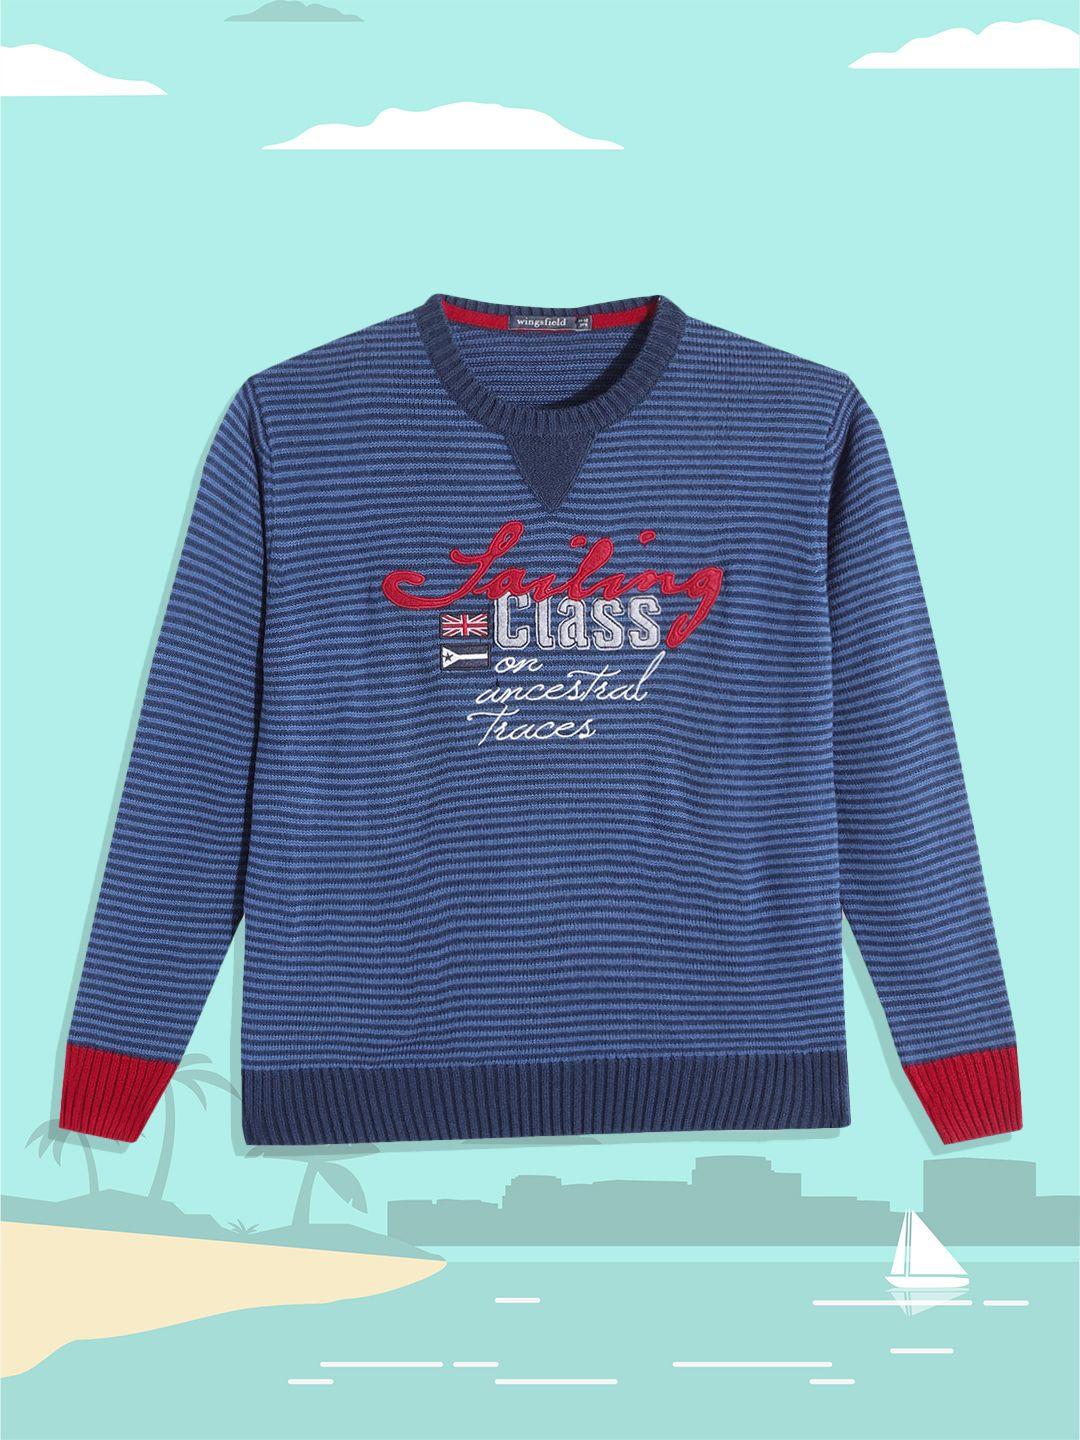 wingsfield boys navy blue striped pullover with applique detail